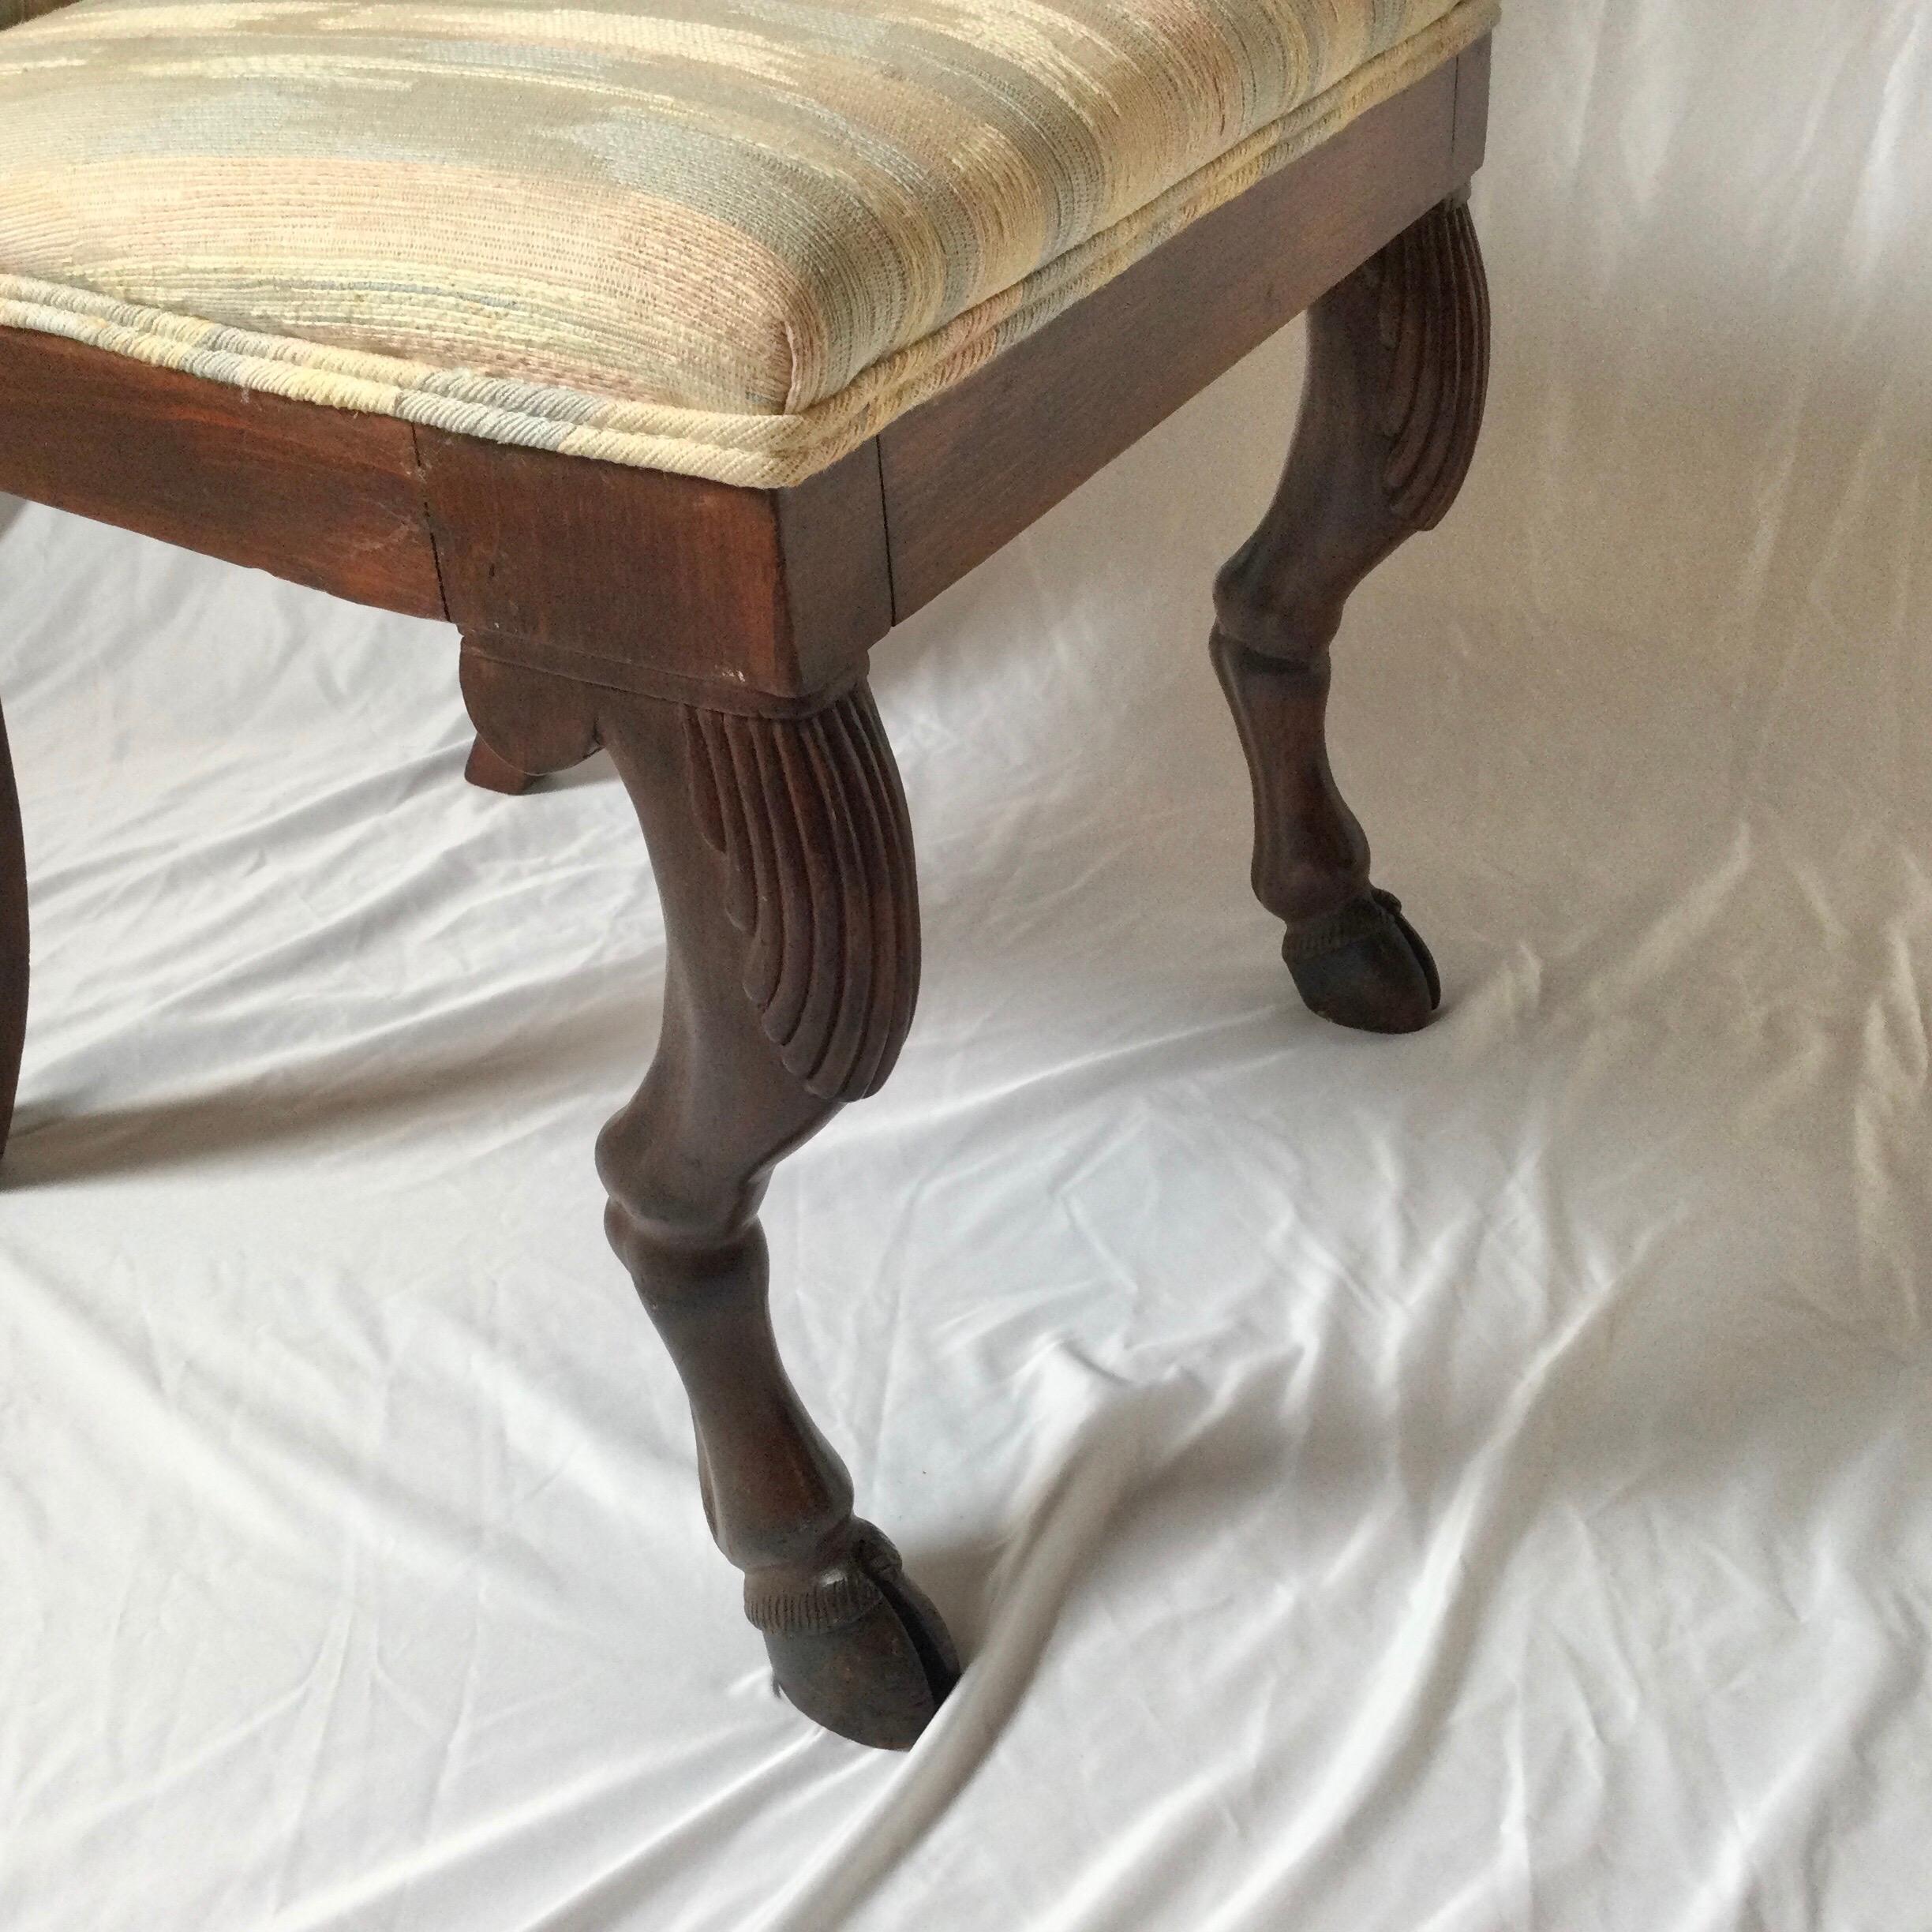 Regency Era Side Chair with Goat Hoof Front Legs In Excellent Condition For Sale In Lambertville, NJ